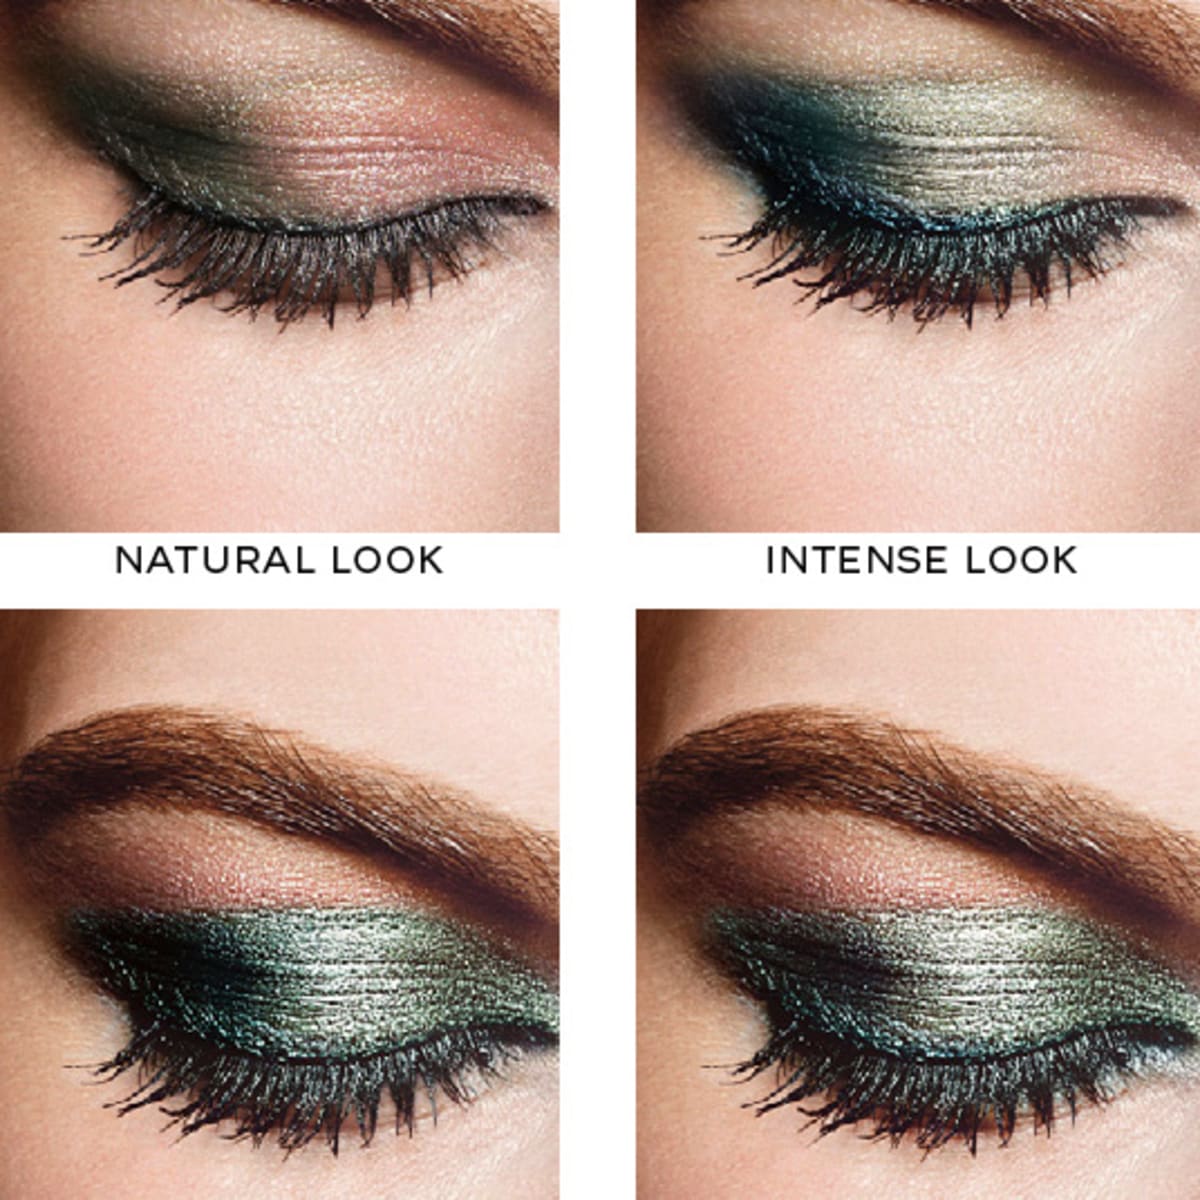 Chanel Eye Makeup Chart: How to Wear Chanel Les 4 Ombres Eye